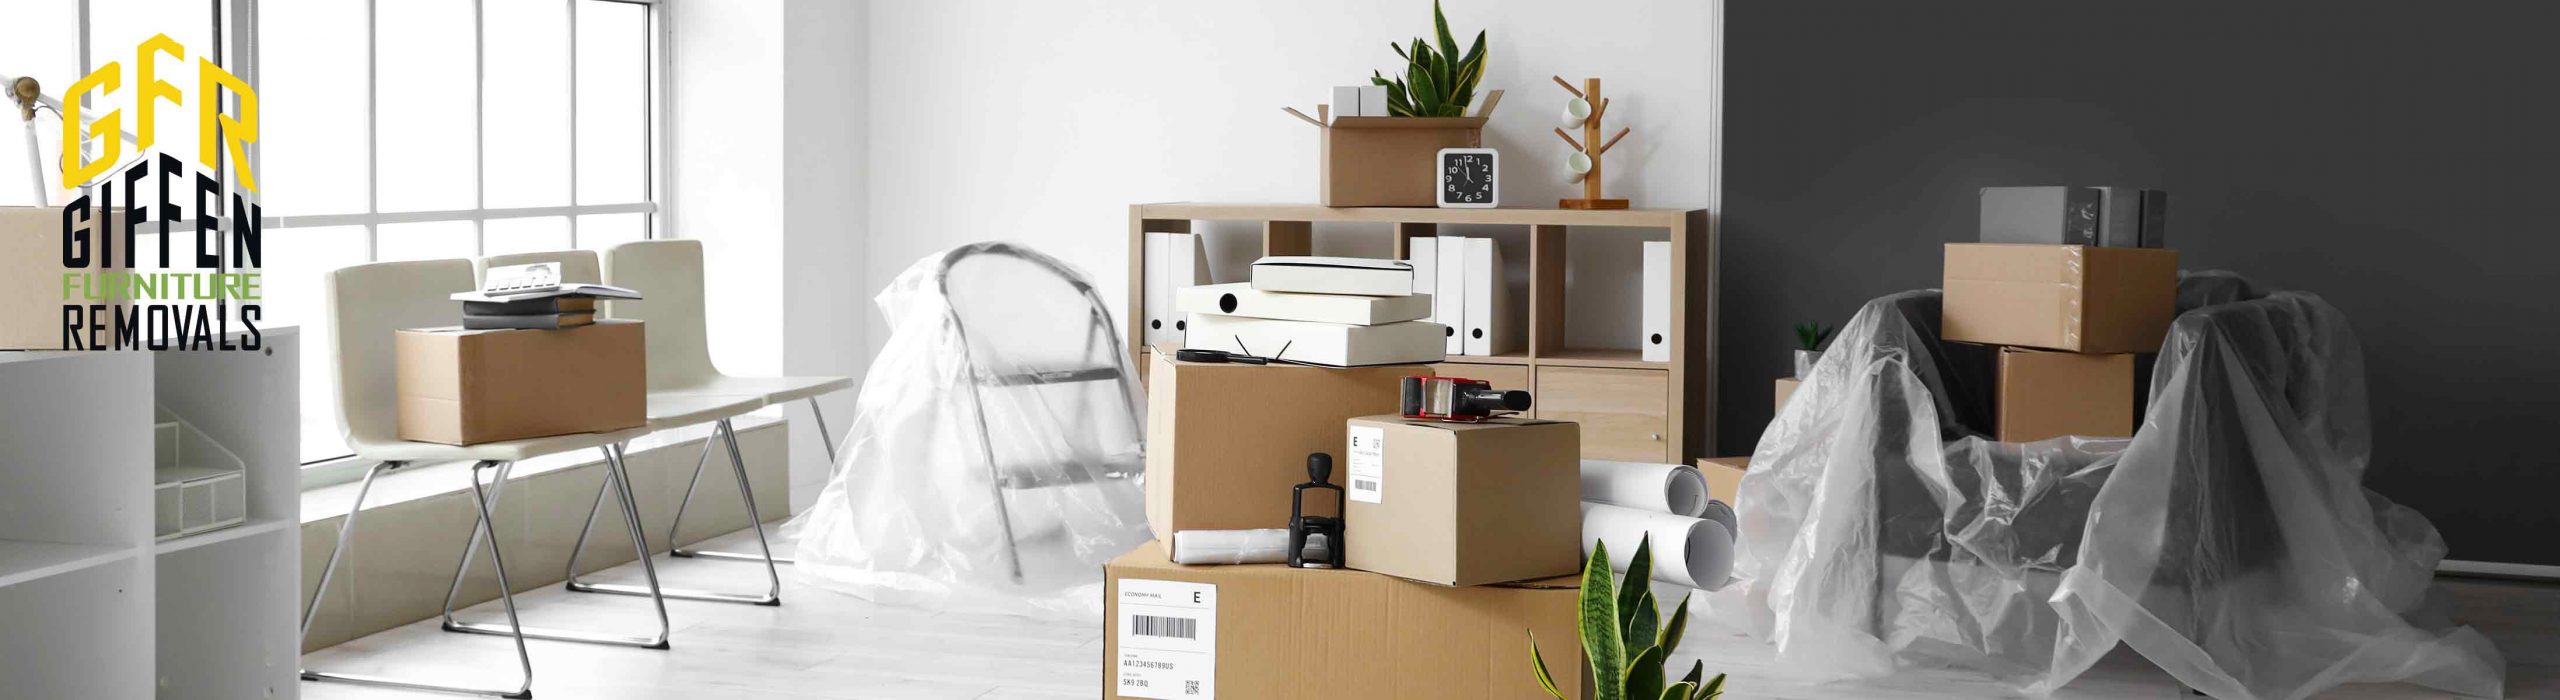 Giffen Furniture Removals How To Plan An Office Move